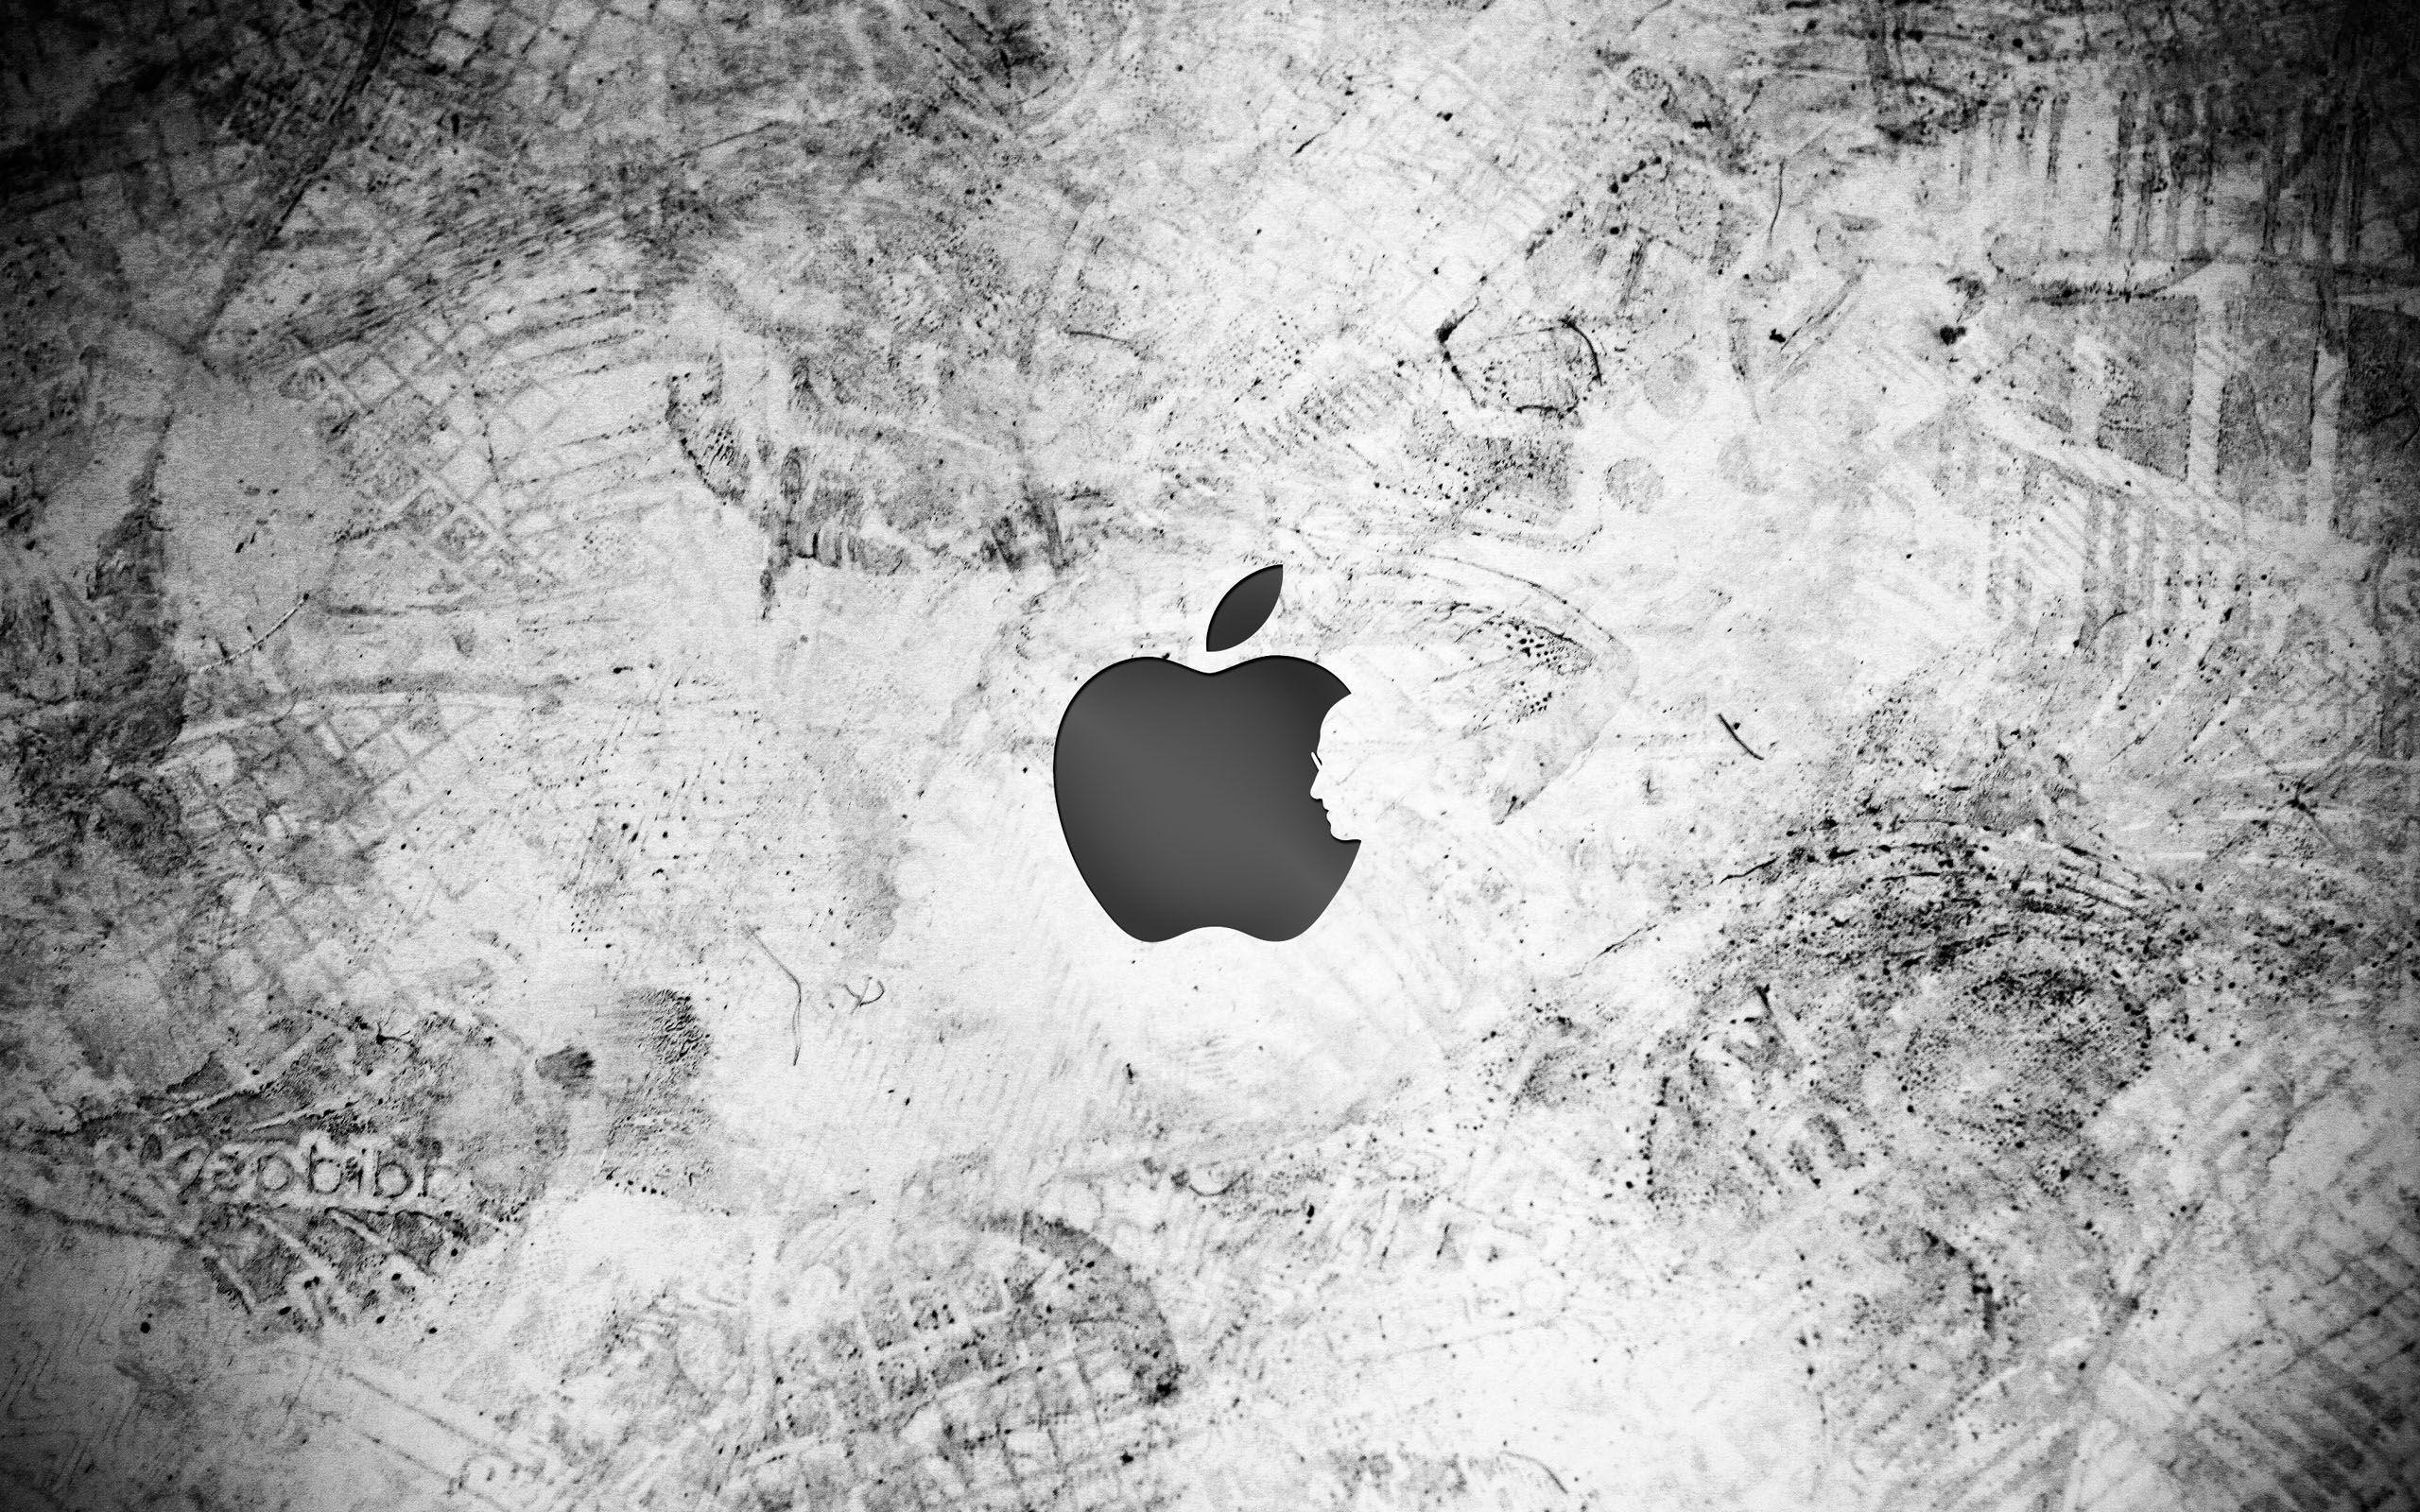 Abstract Apple Background Wallpaper. Download wallpaper page